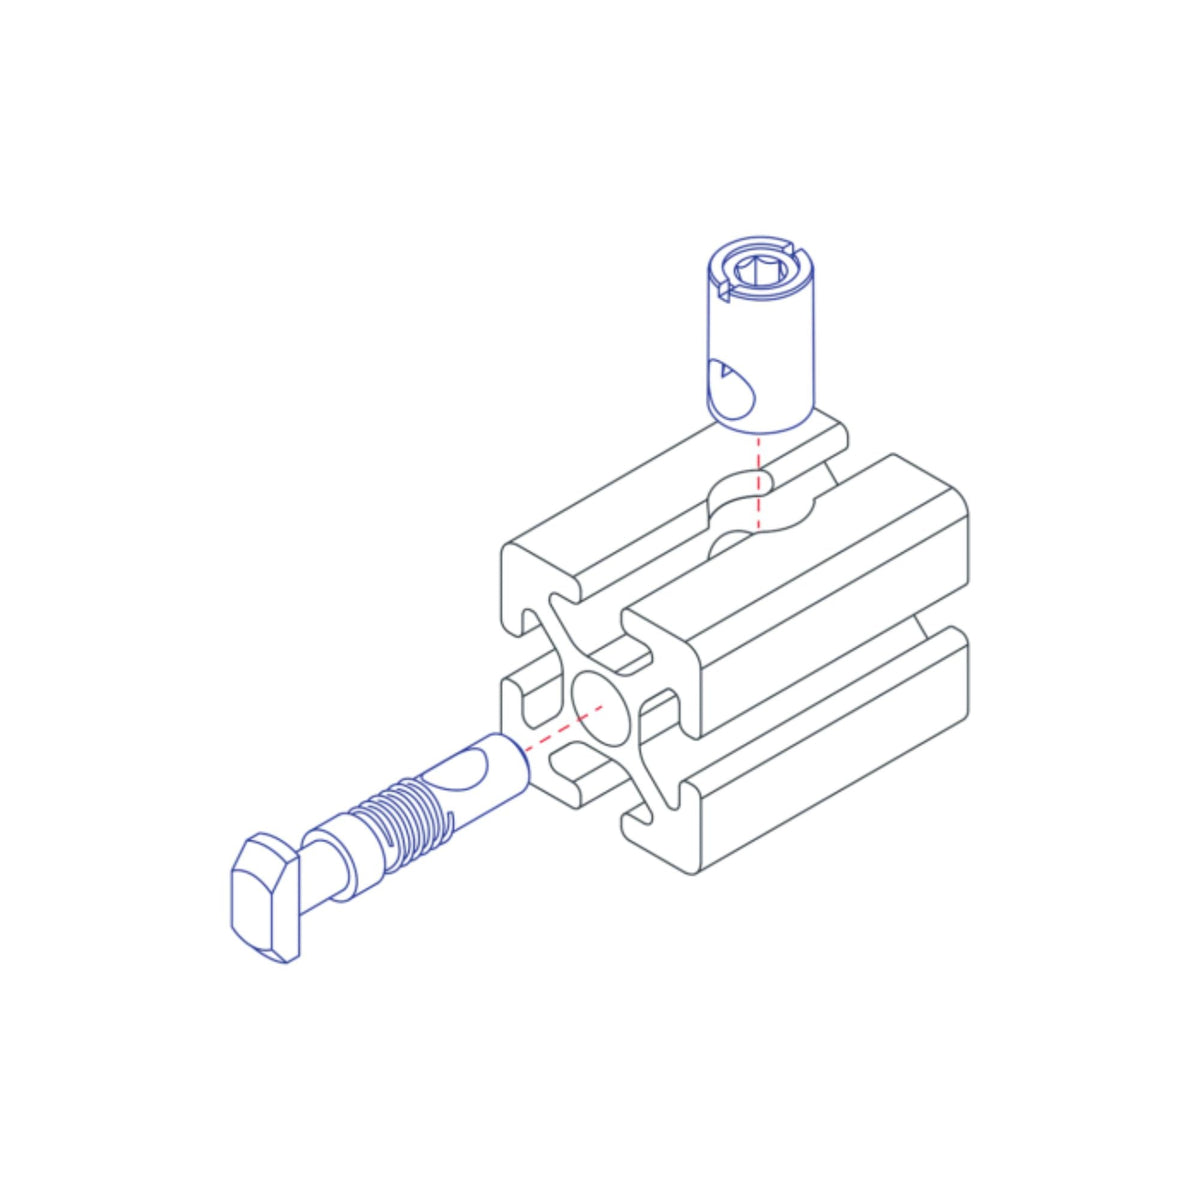 diagram of a central connector and a t-slotted bar